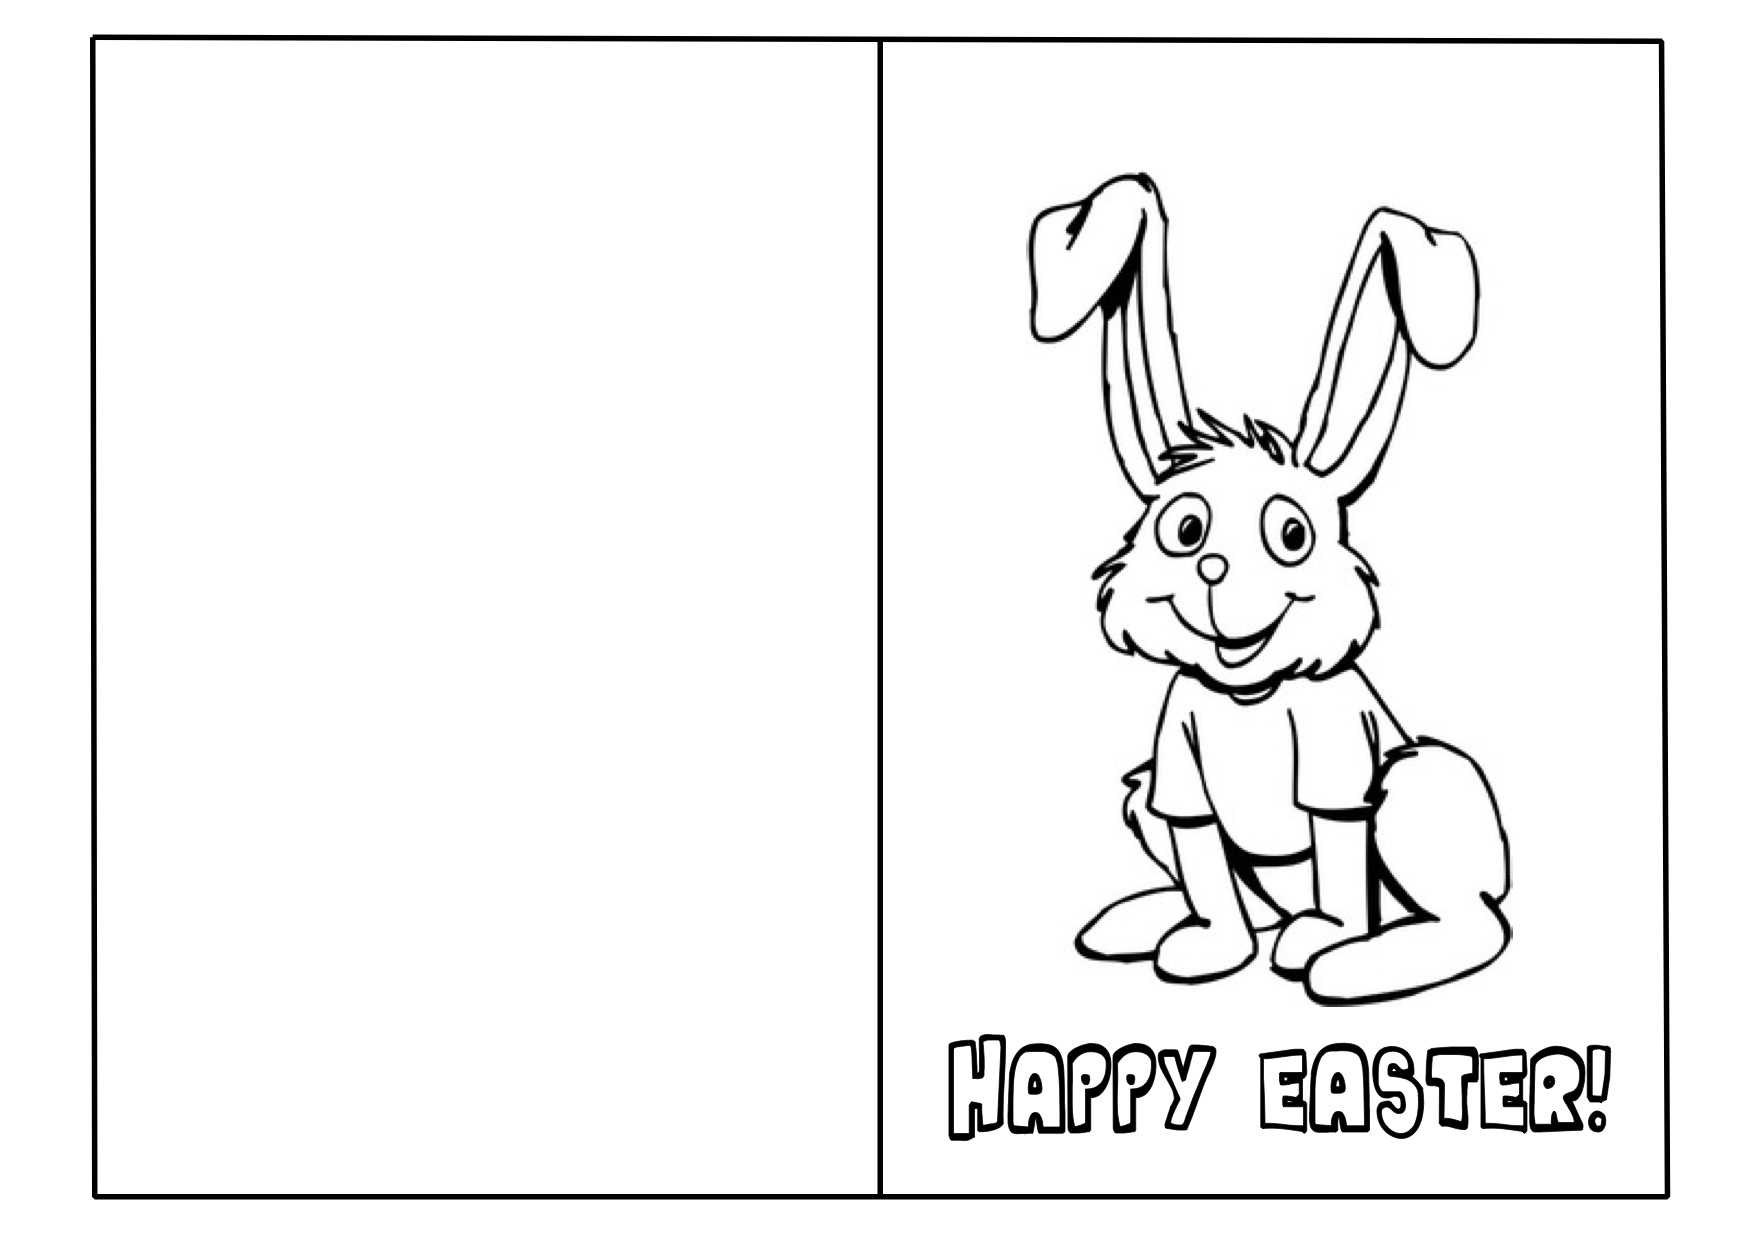 Easter Card Template Ks2 1 – Happy Easter Sunday For Easter Card Template Ks2